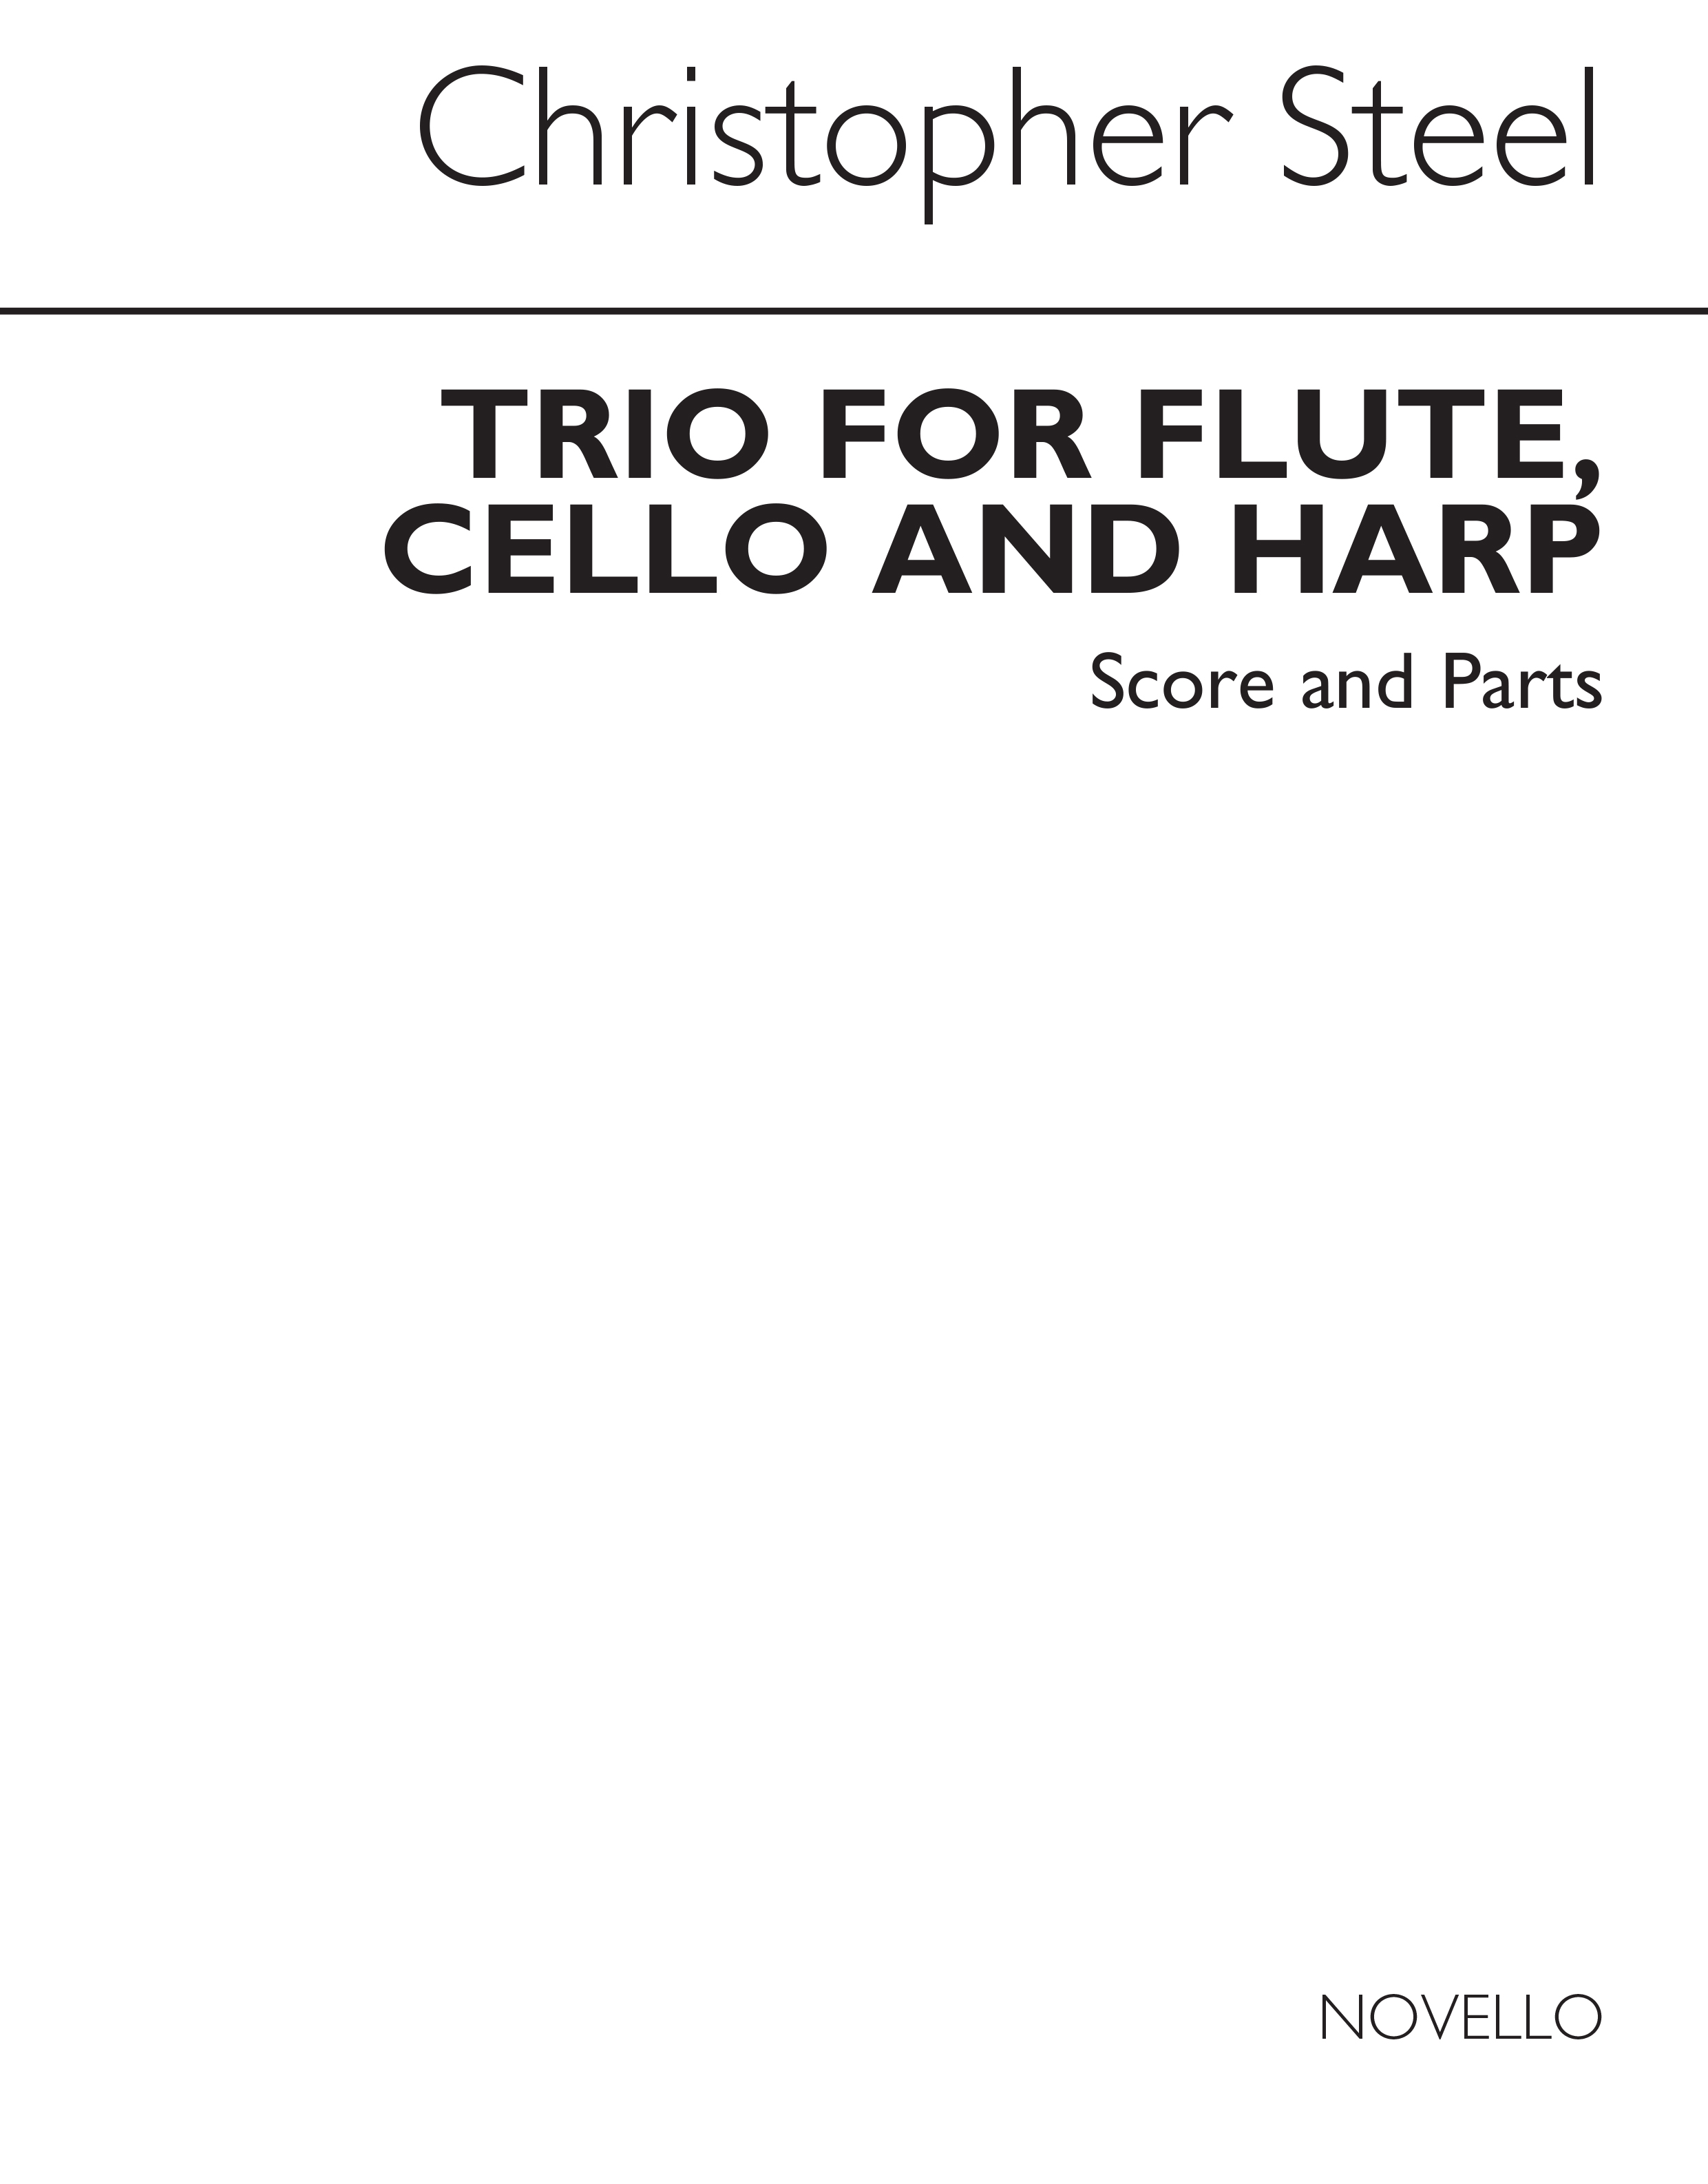 Christopher Steel: Trio For Flute, Cello And Harp Score And Parts